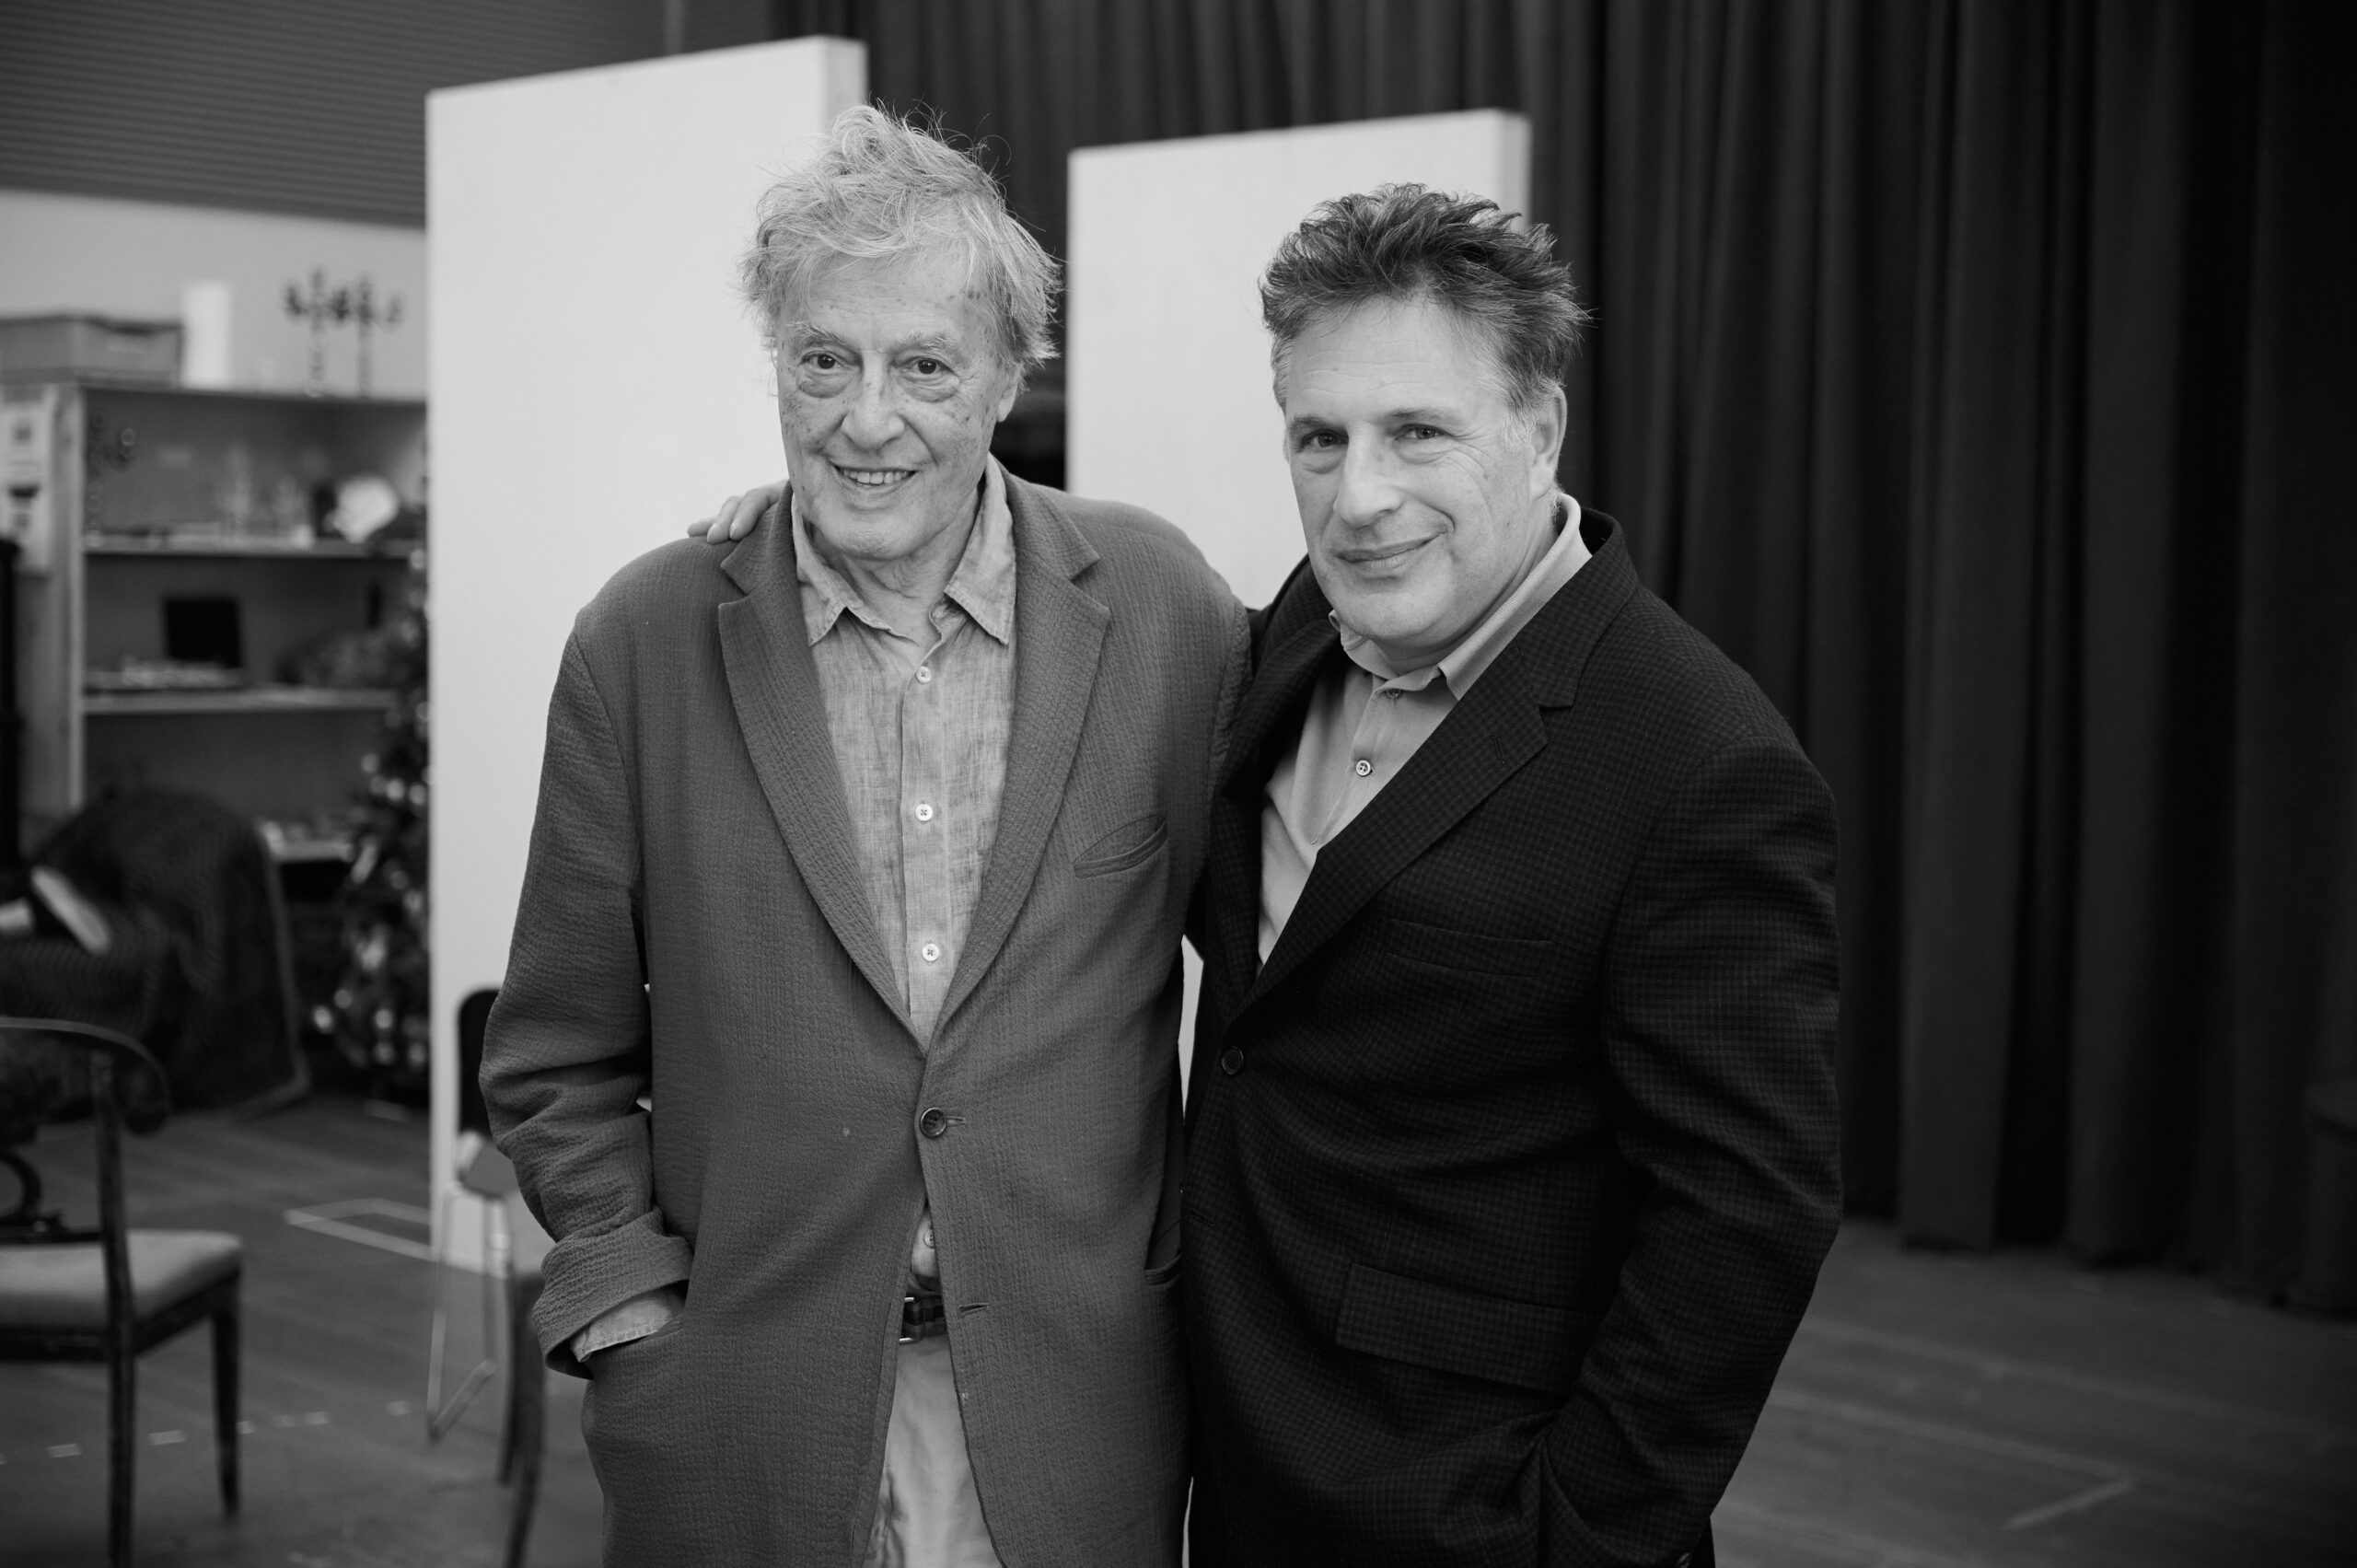 Tom Stoppard and Patrick Marber of Leopoldstadt. Photo by Jenny Anderson.